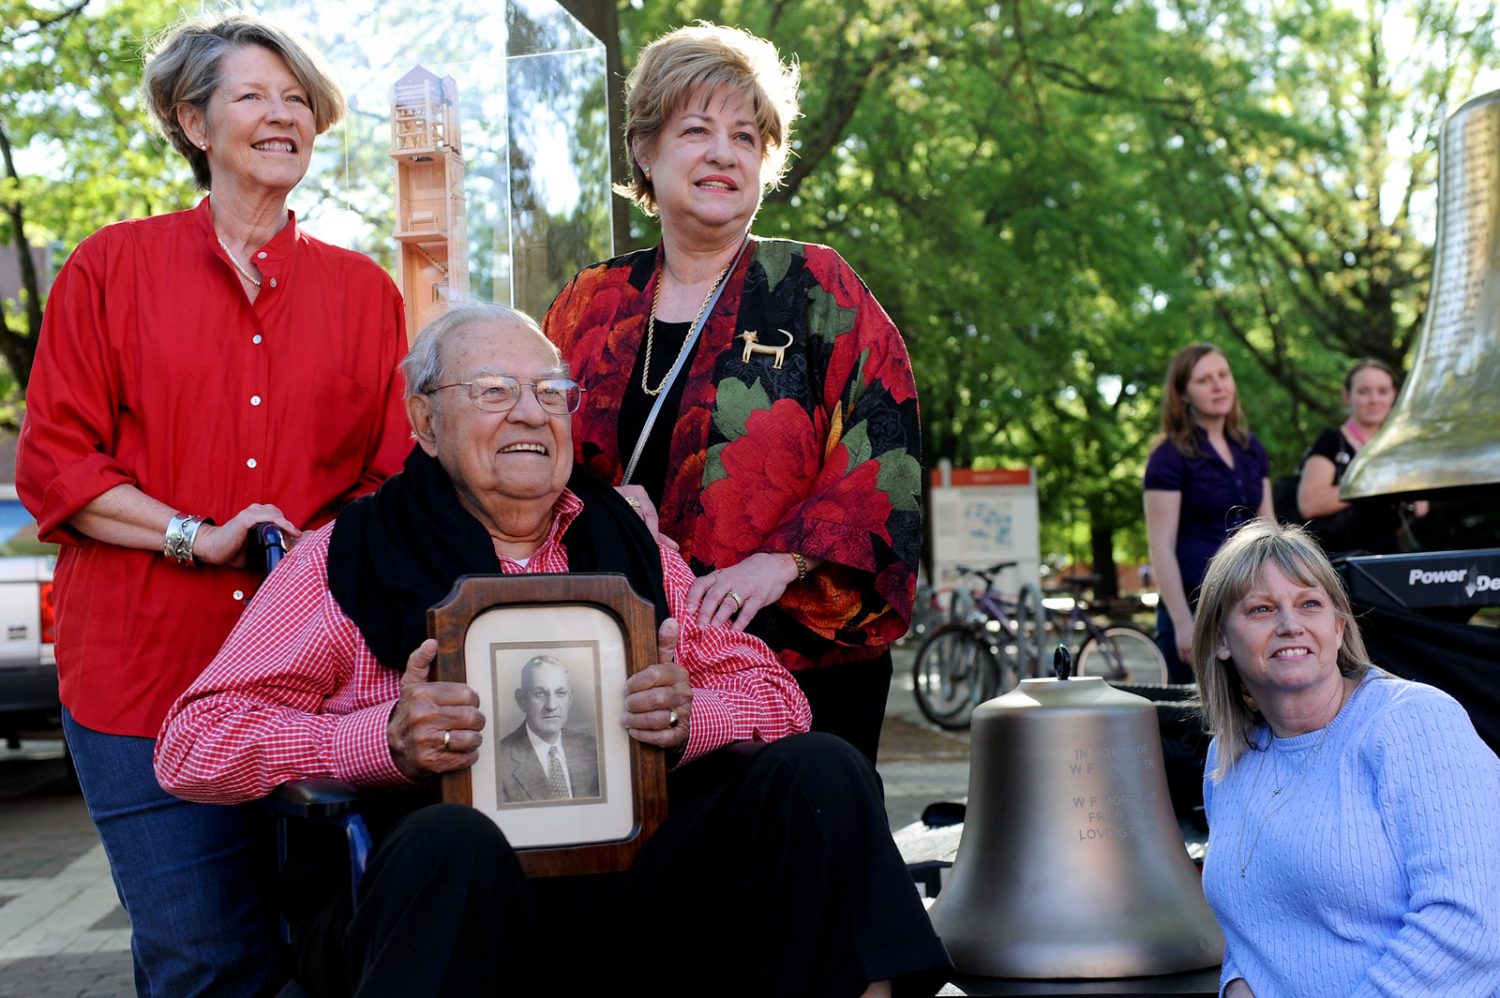 William Morris Jr with family holding a picture of William Morris Sr in front of their bell in 2012